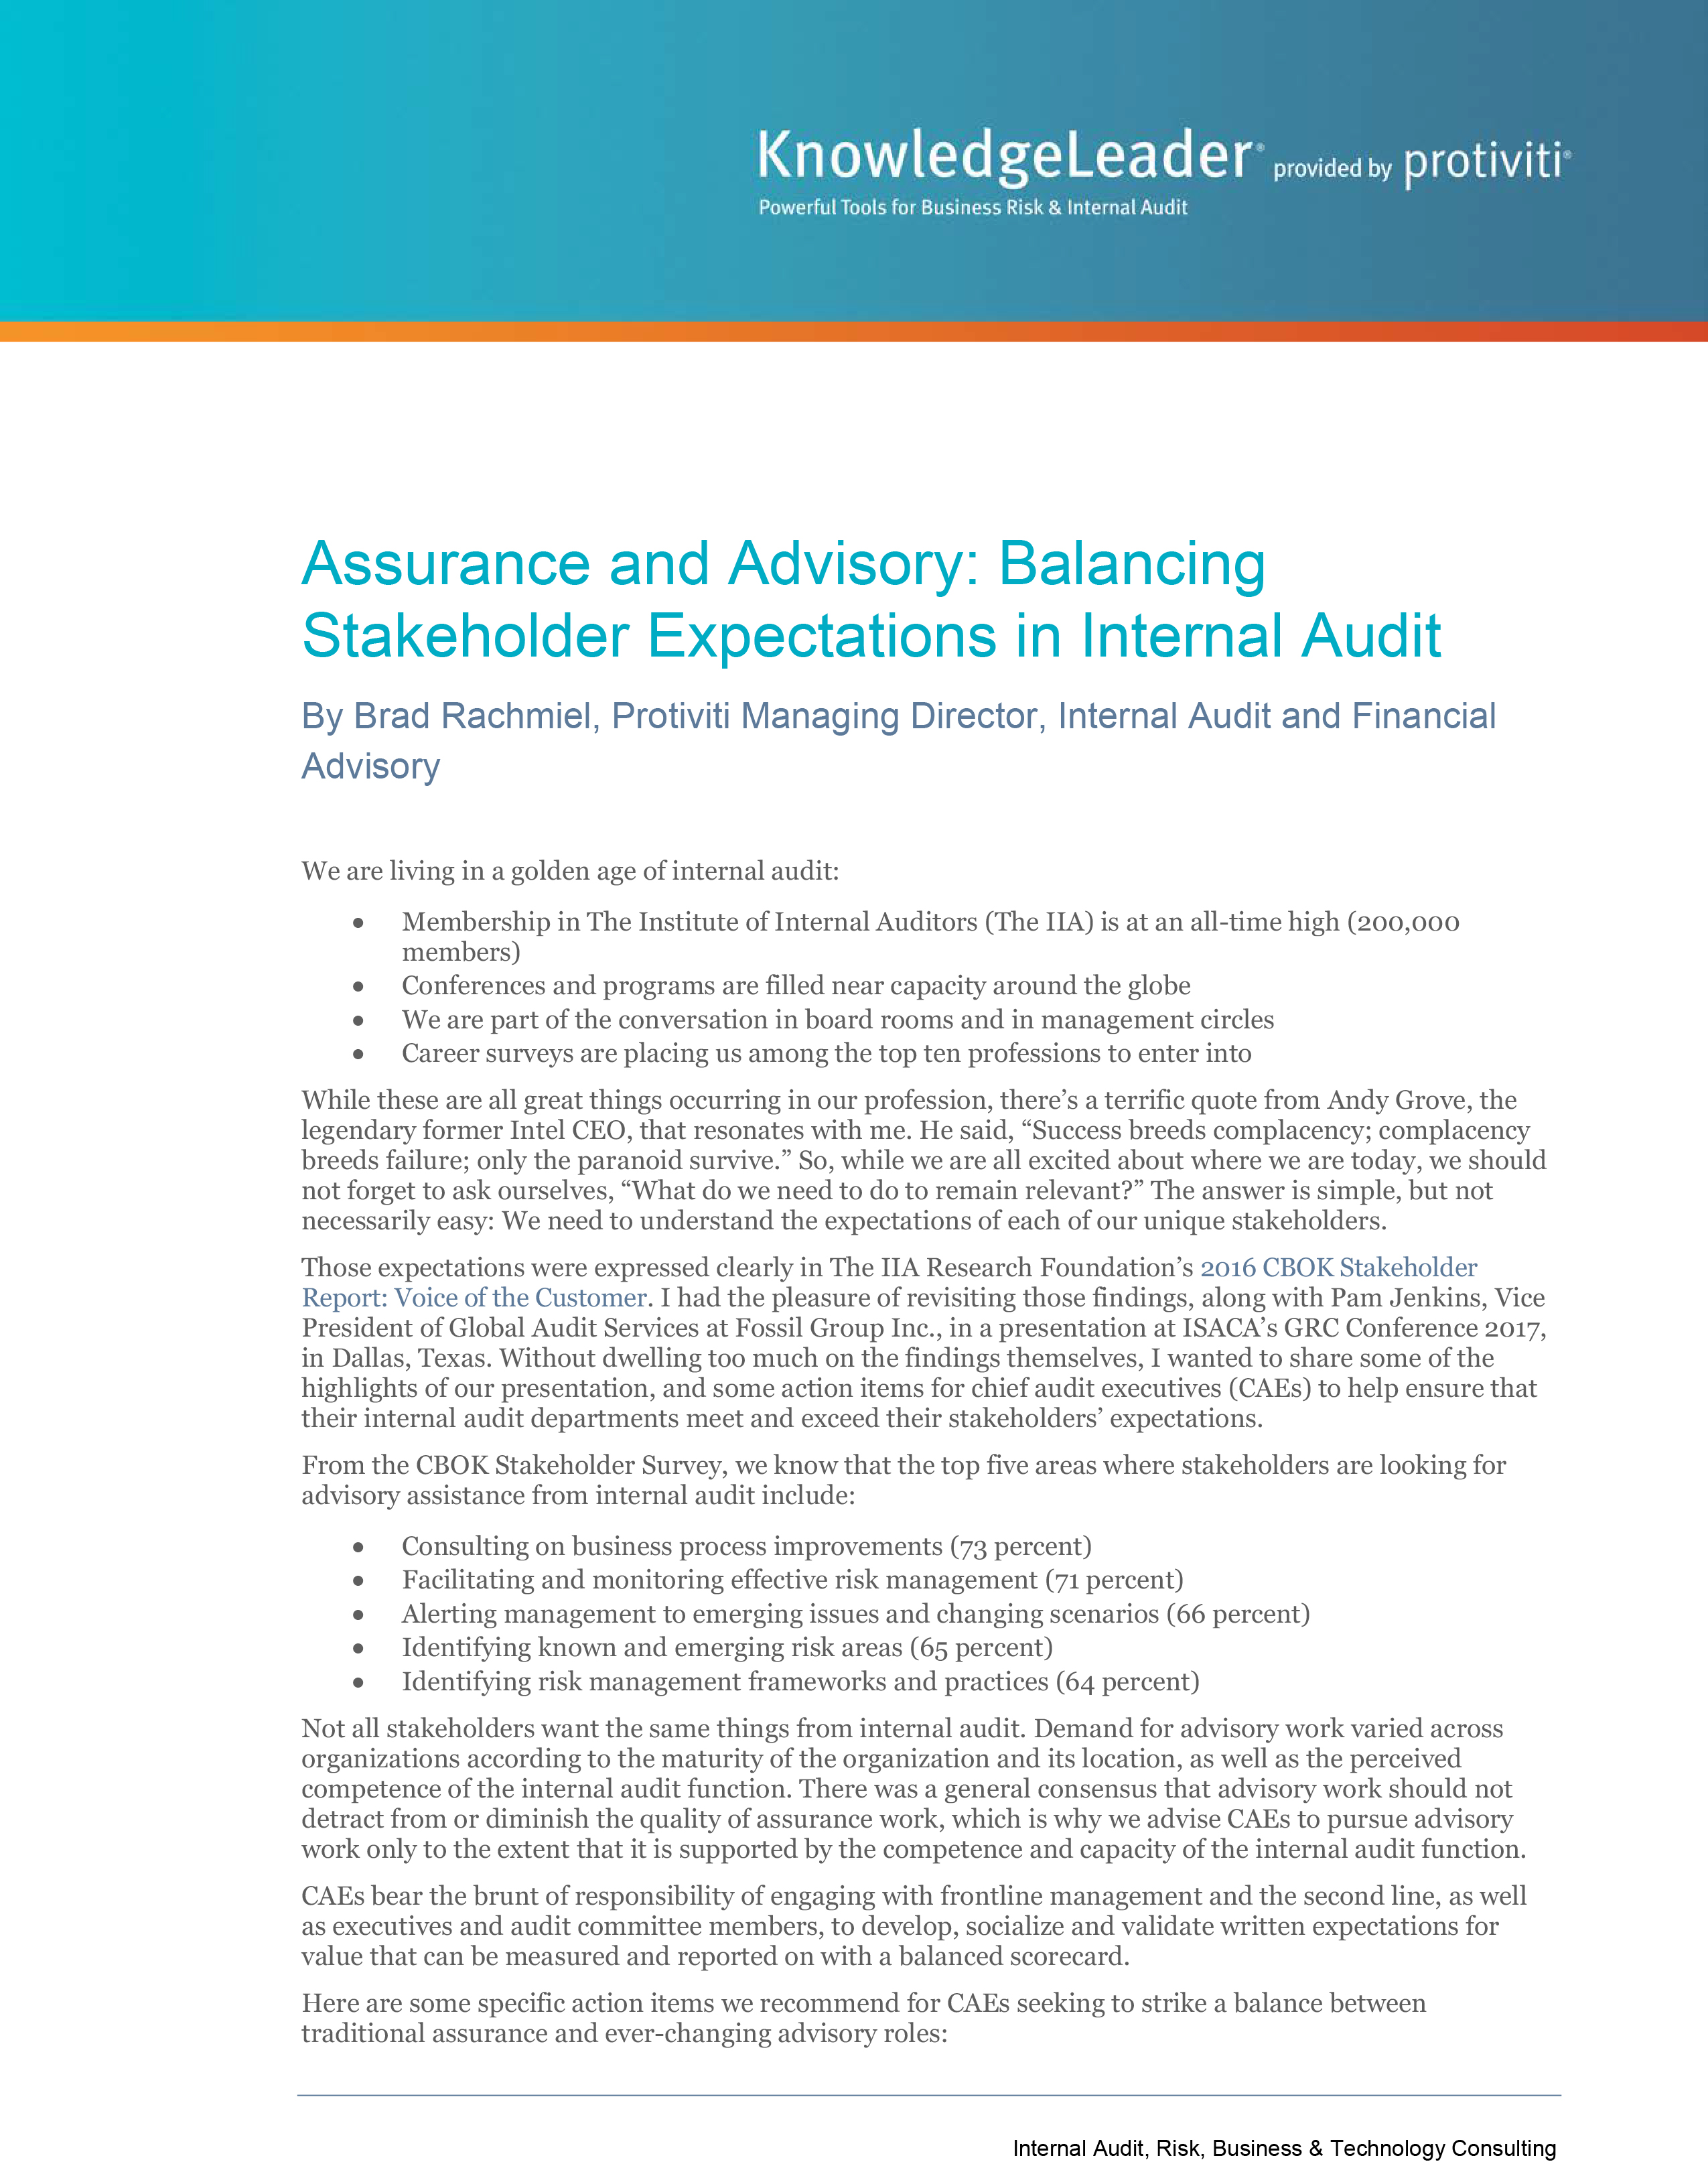 Screenshot of the first page of Assurance and Advisory - Balancing Stakeholder Expectations in Internal Audit